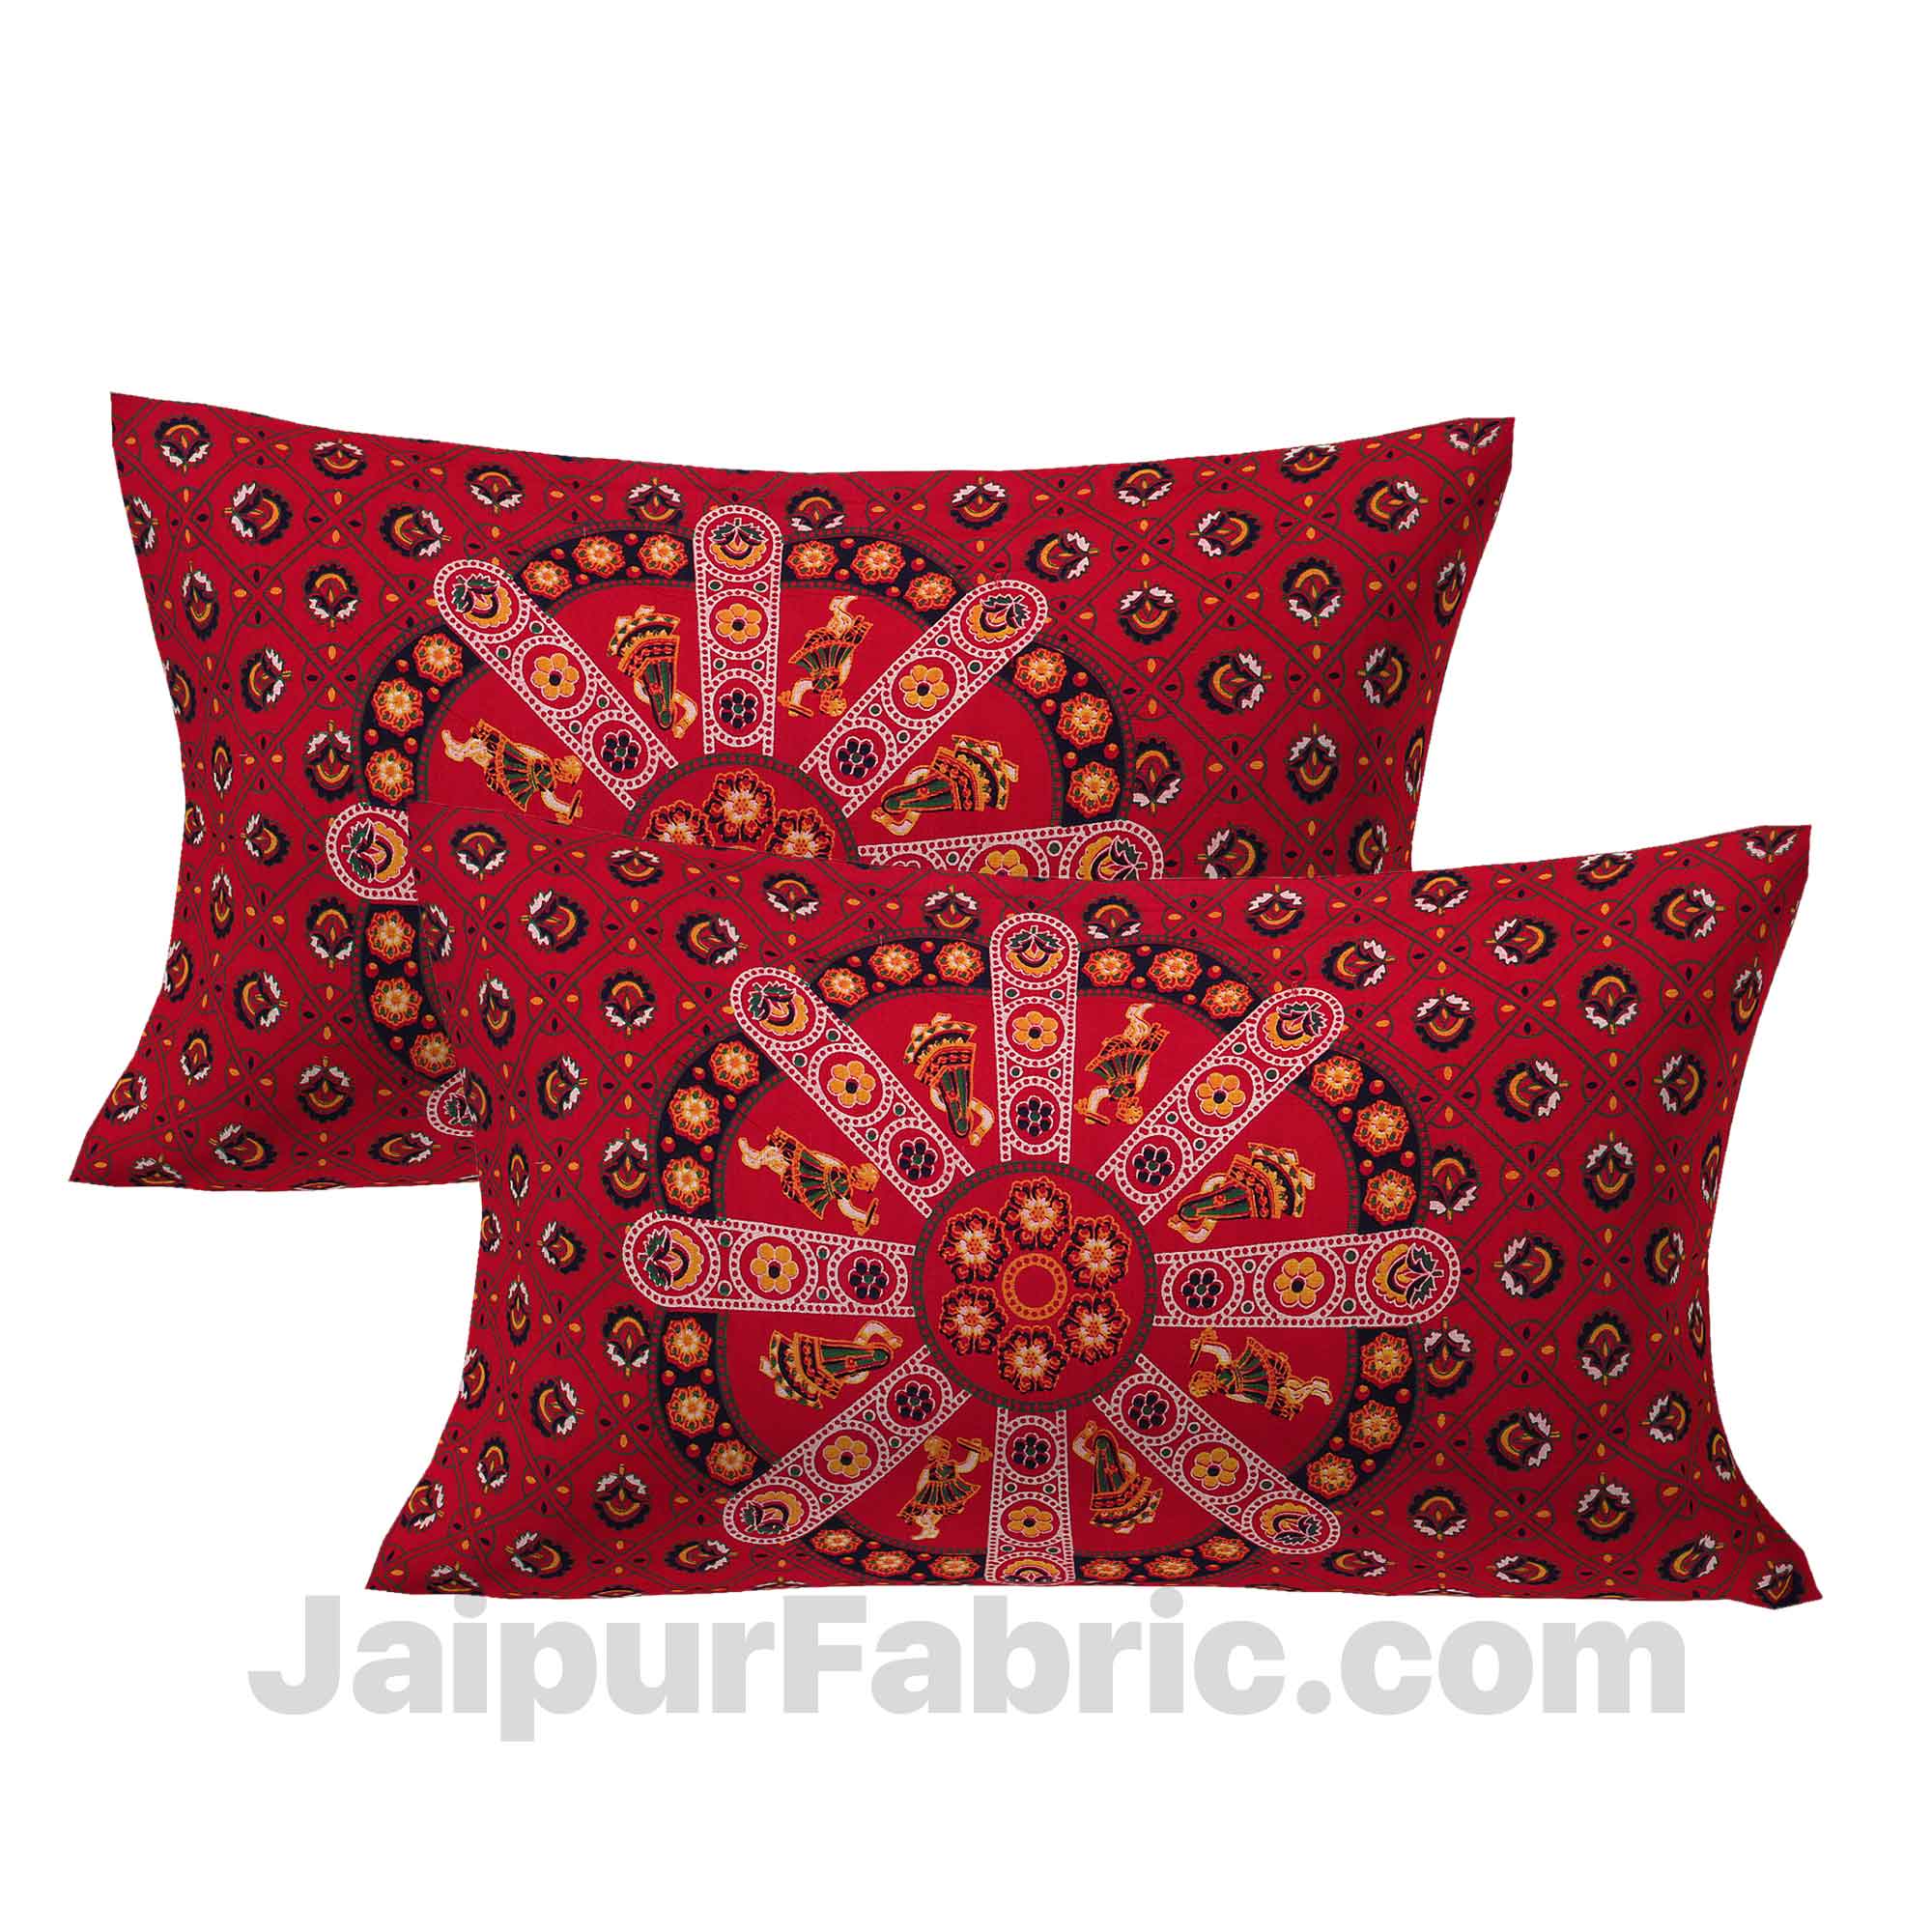 Pure Cotton Red Mandala Traditional King Size Double Bedsheet with 2 Pillow Cover